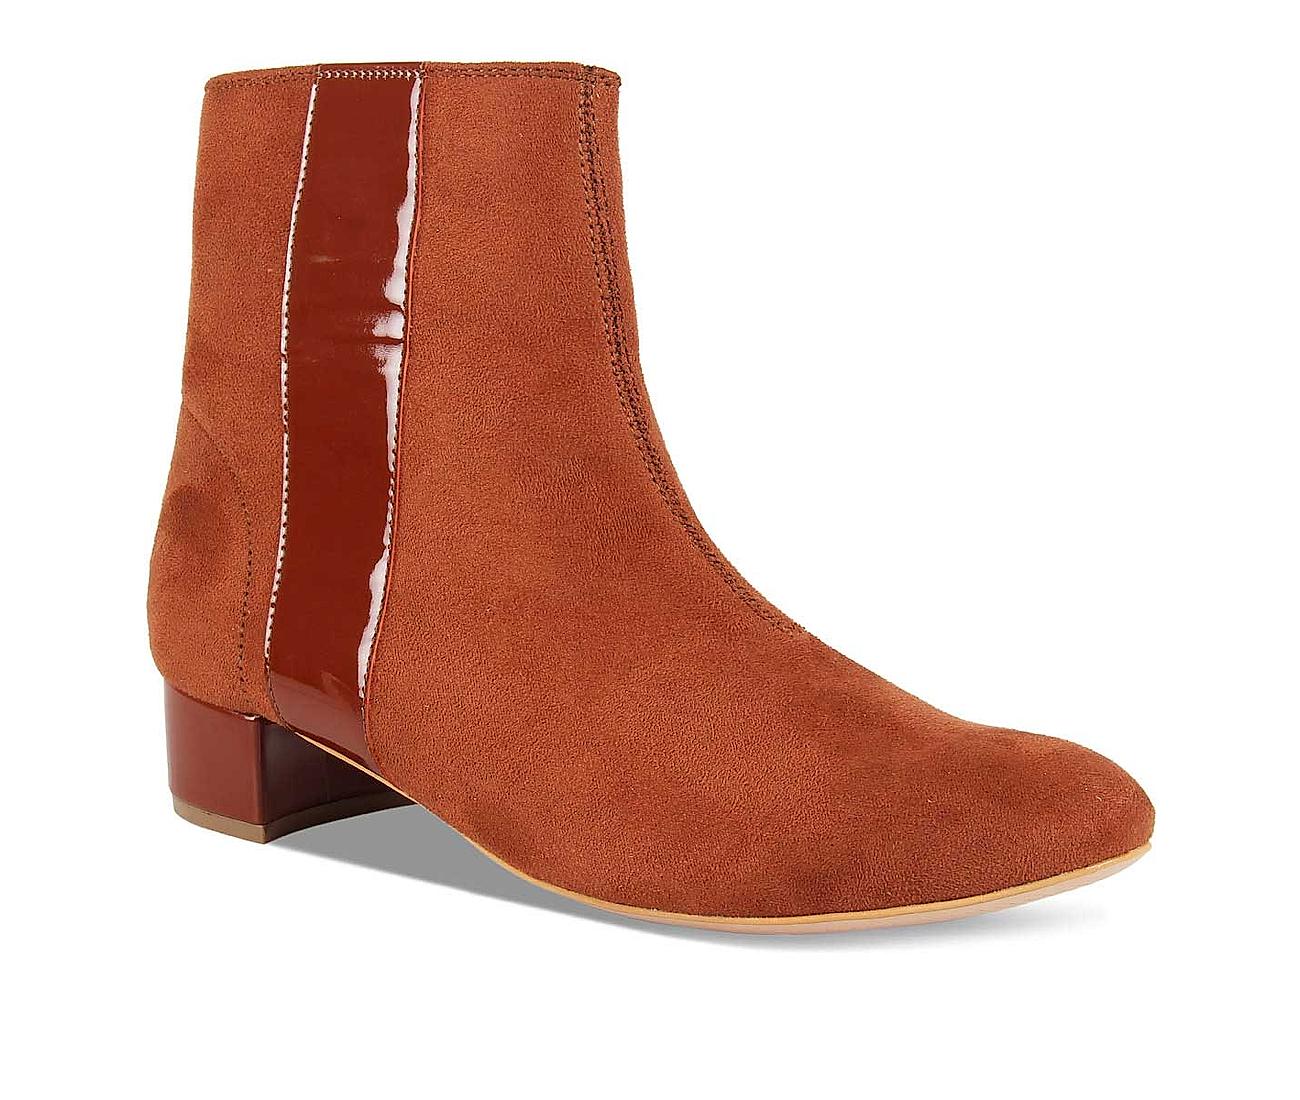 BOYD BOOTS TAN LEATHER – Dolce Vita